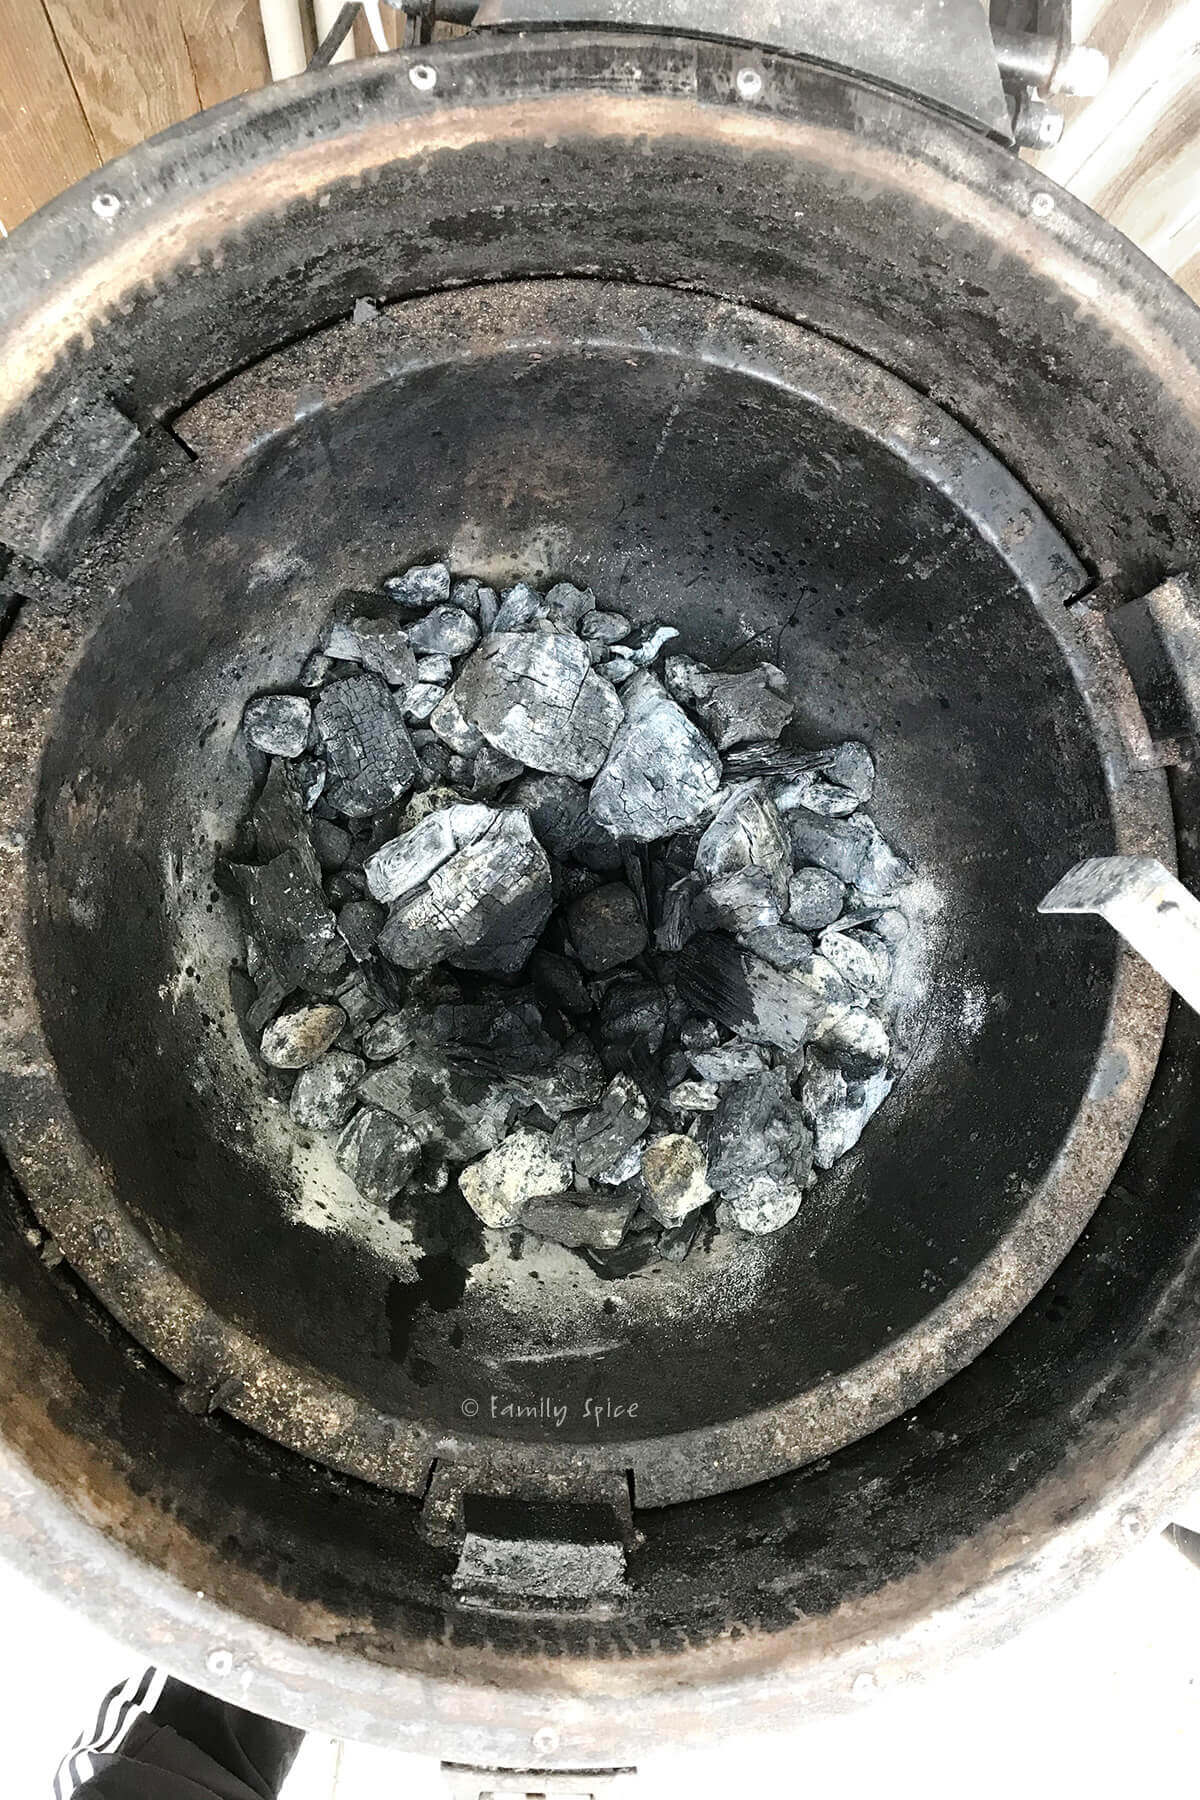 Looking inside of a round kamado grill with charred wood in it